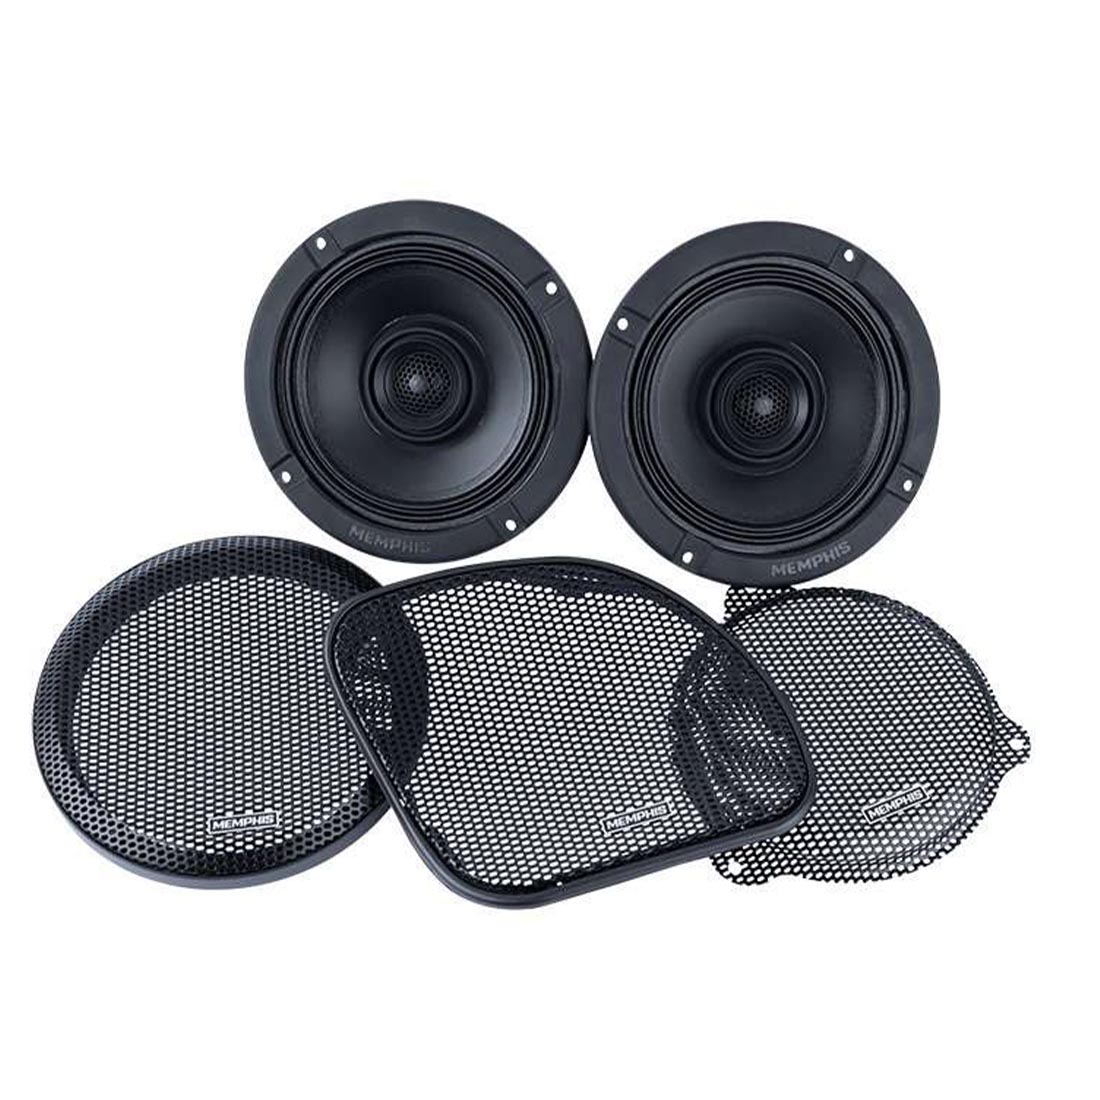 Memphis Audio MXAHDPRO4 6.5" Speaker Motorcycle Audio compatible with Harley Davidson Direct OEM Kits